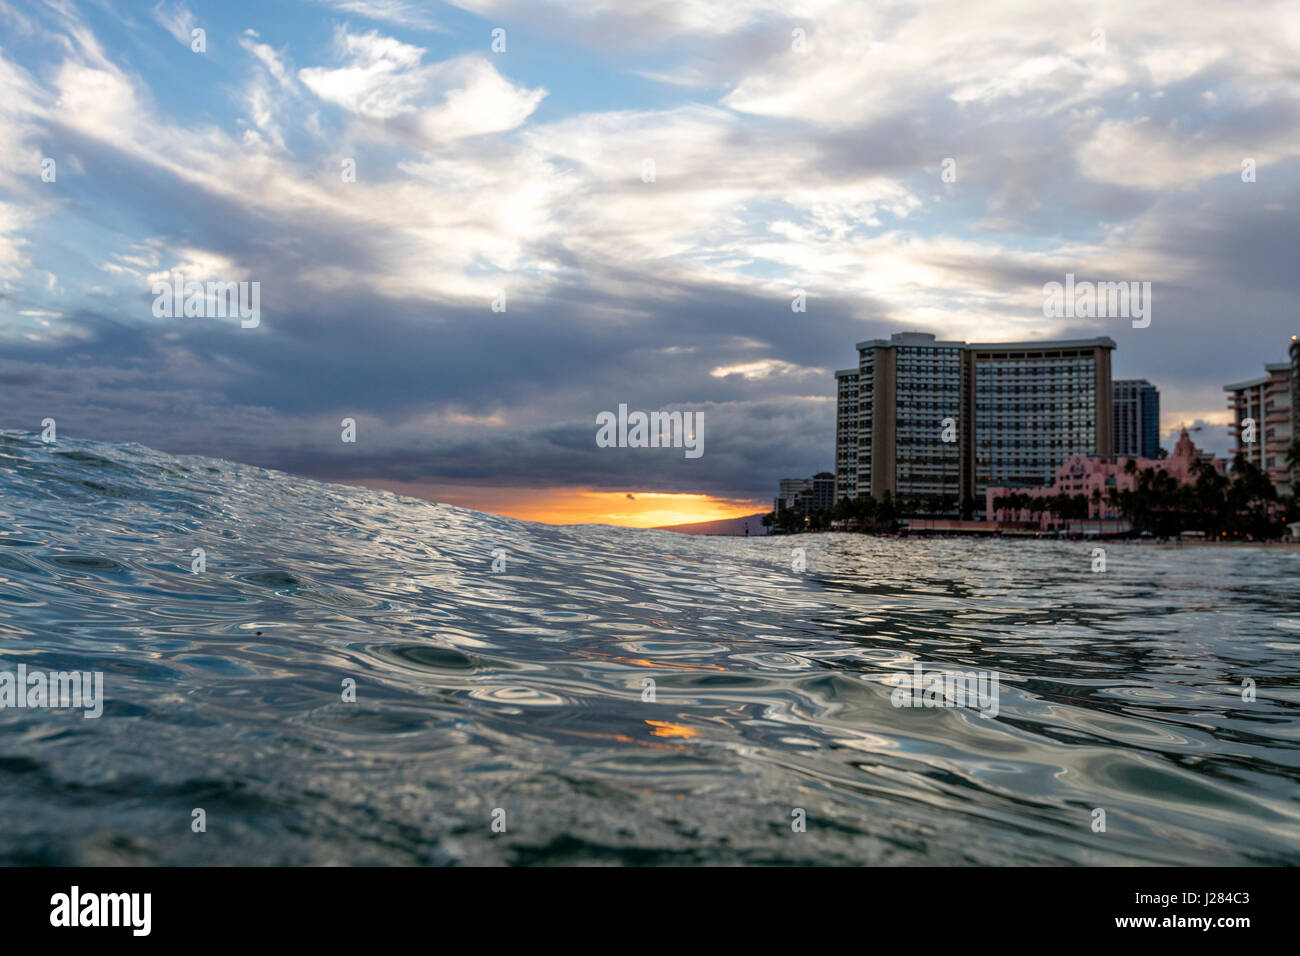 Sea against cloudy sky in city during sunset Stock Photo